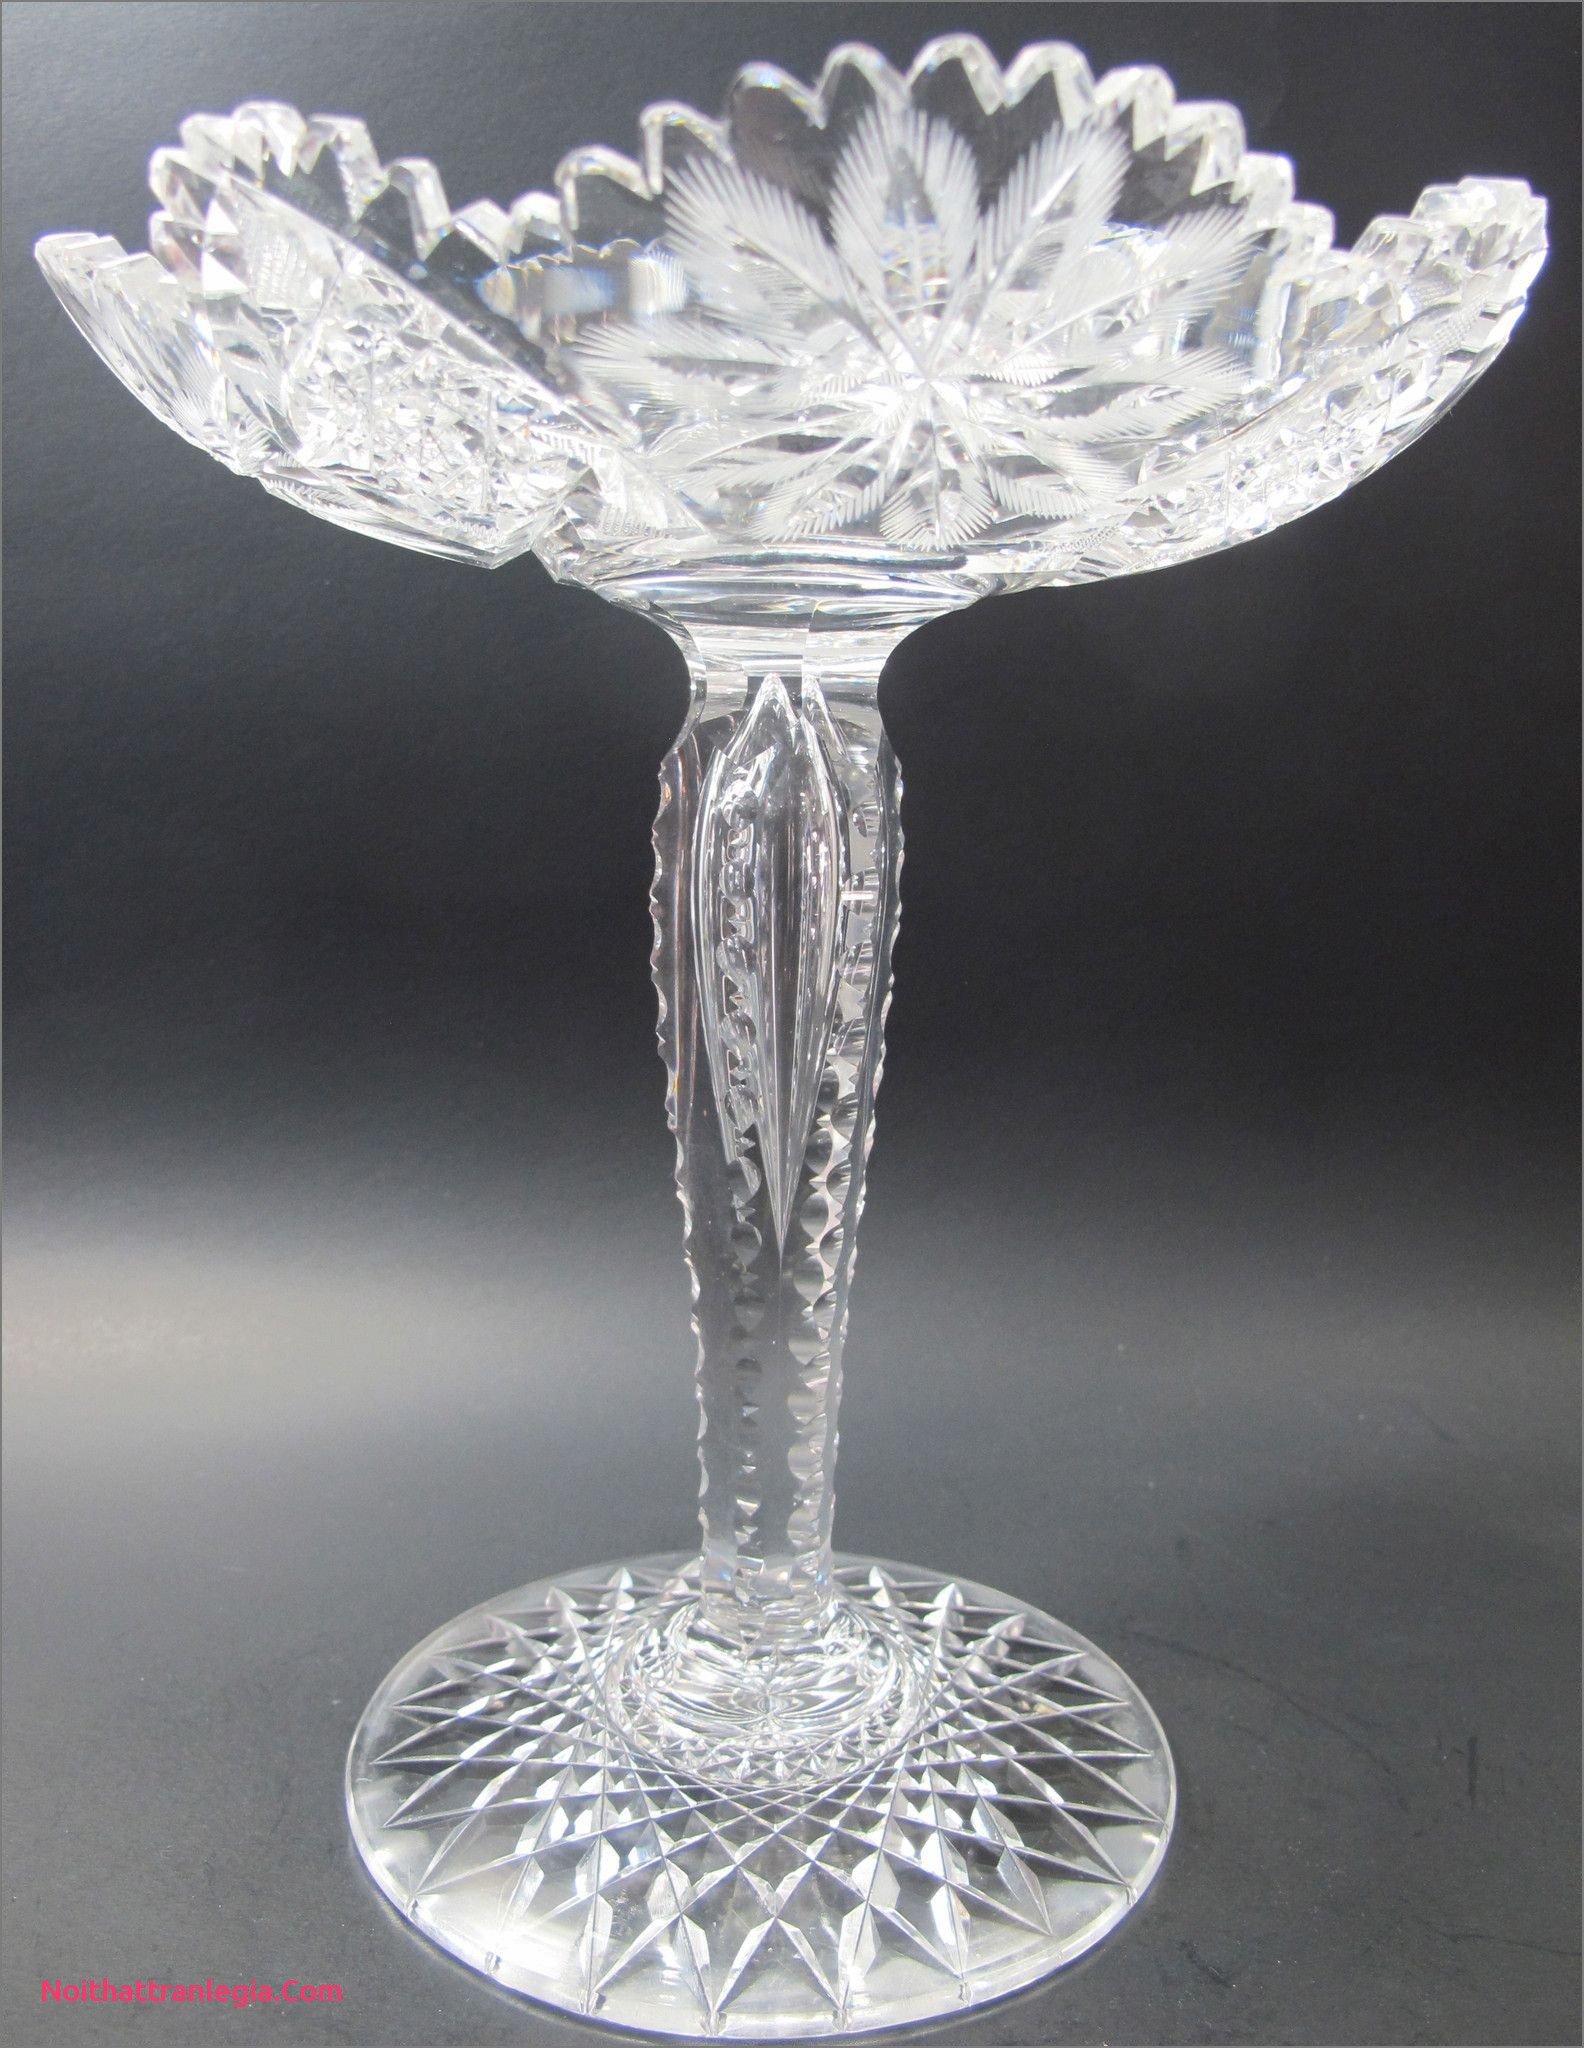 28 Awesome Vintage Clear Glass Flower Vases 2024 free download vintage clear glass flower vases of 20 cut glass antique vase noithattranlegia vases design throughout fering this abp antique cut glass pote from the american brilliant period 1886 1916 9 5